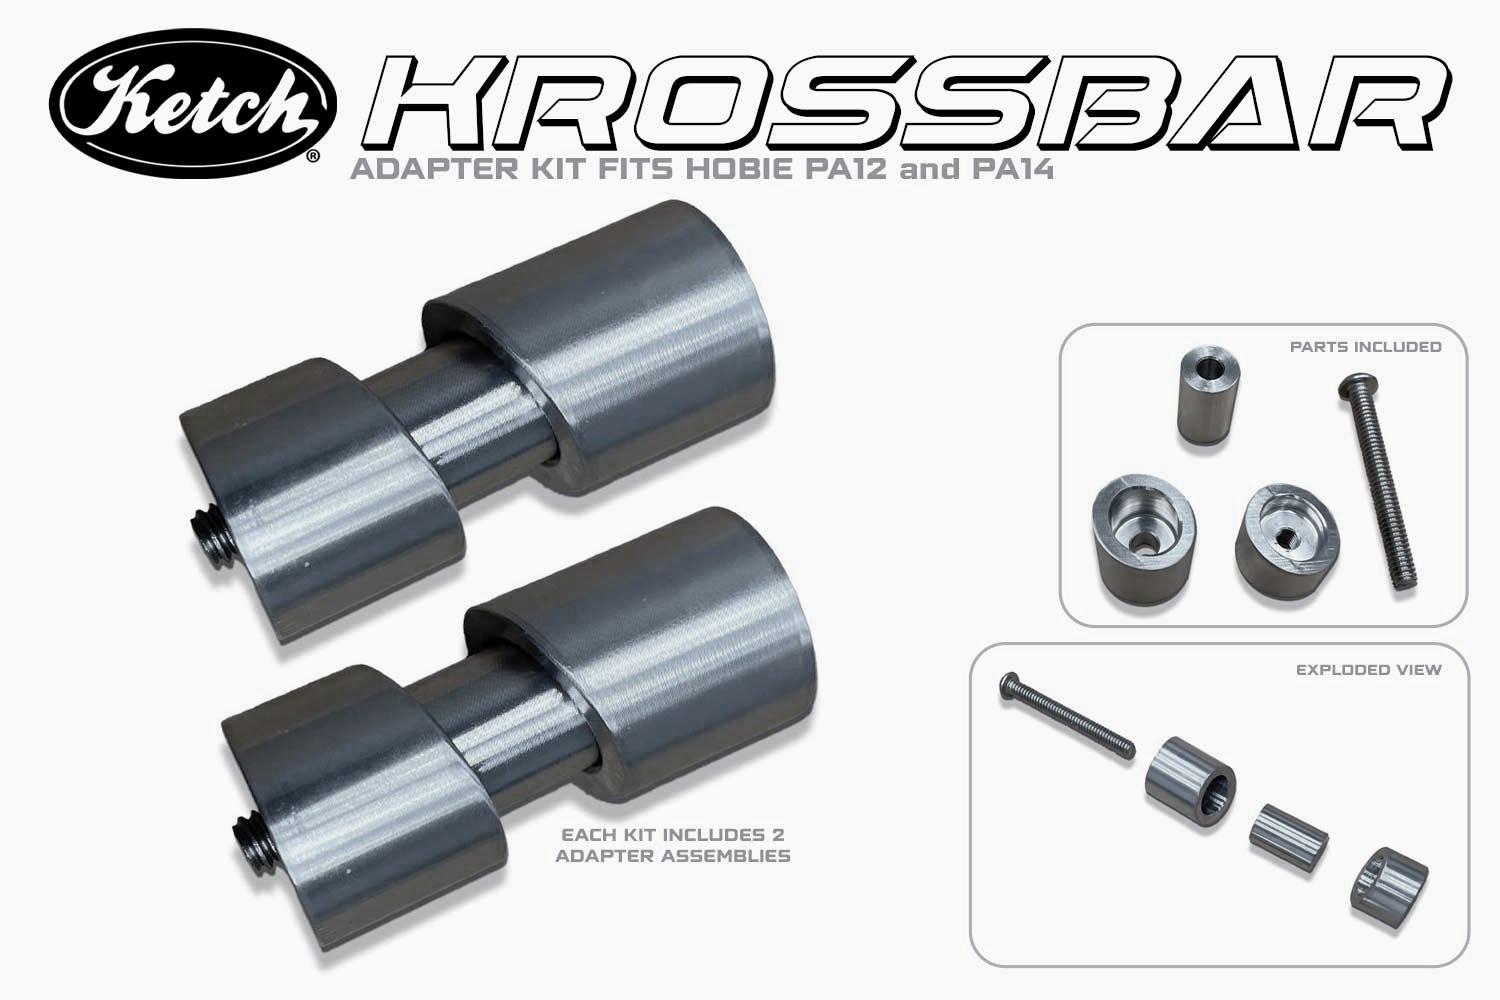 Ketch Krossbar Hobie PA14 Adapter kit for mounting the Krossbar to the Jake Plates of a Hobie Pro Angler 12 or 14 kayak.